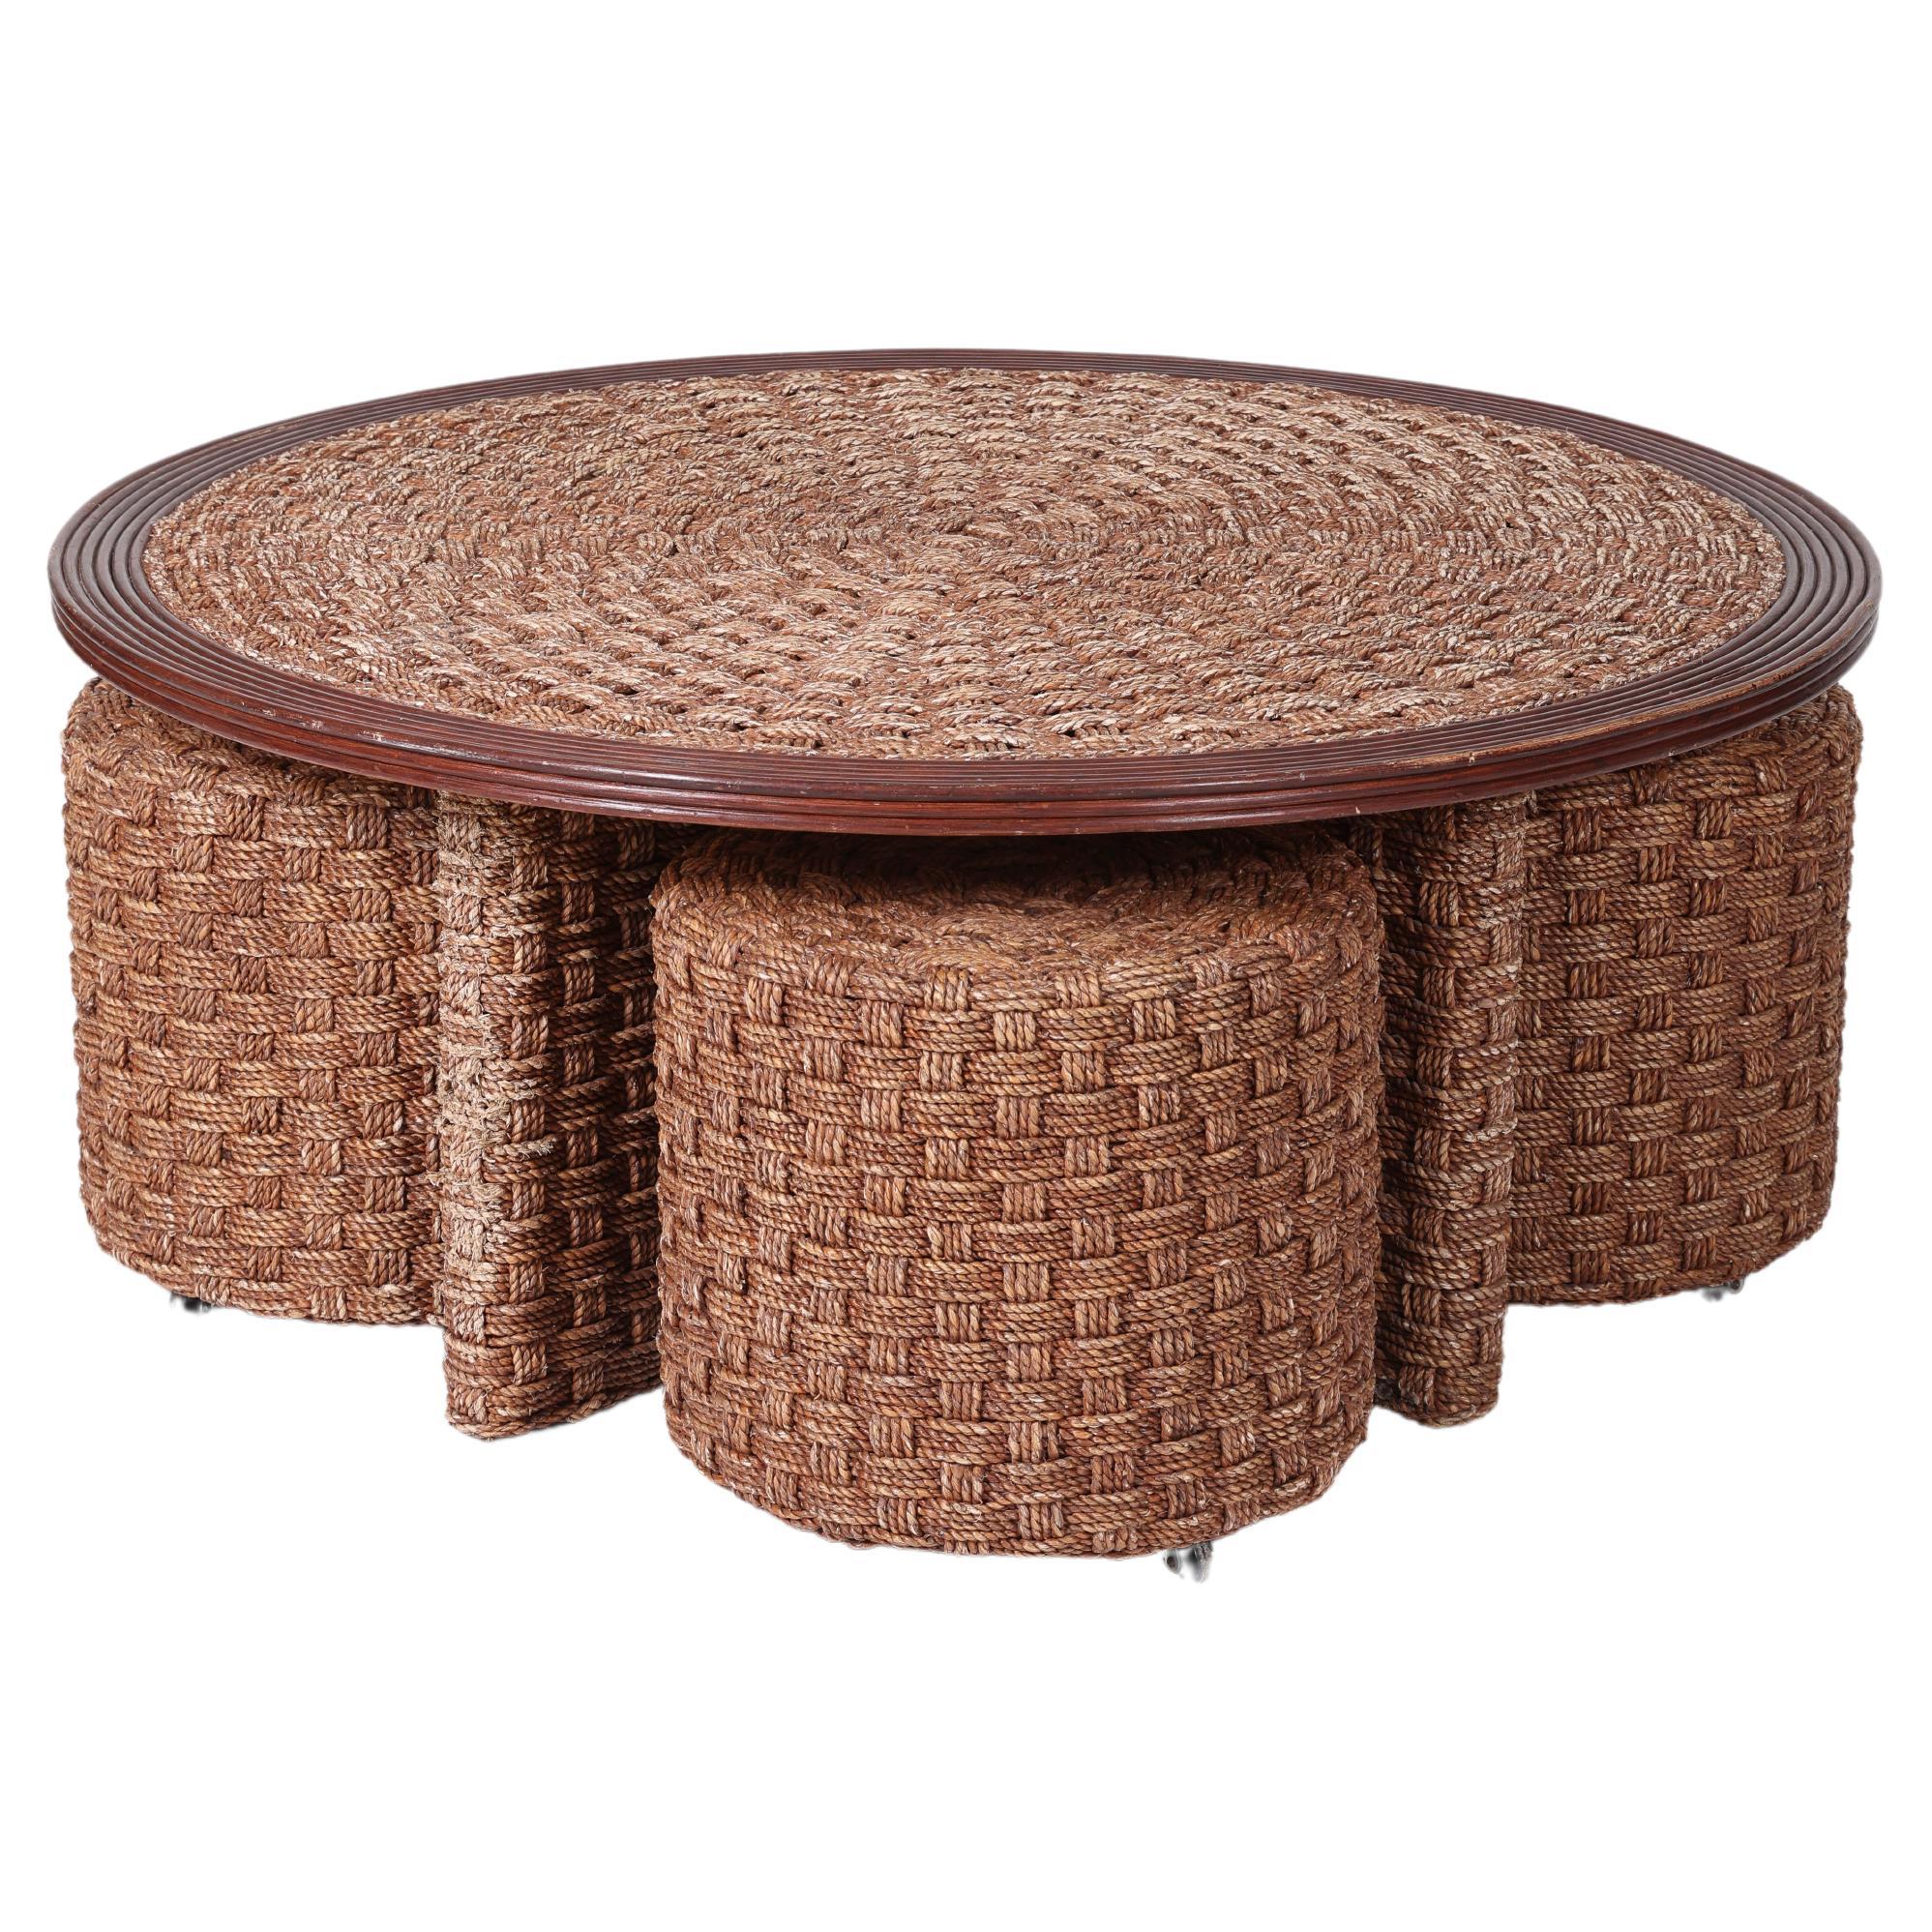 Coffee table and stools in woven rope and wood, mid-20th century For Sale